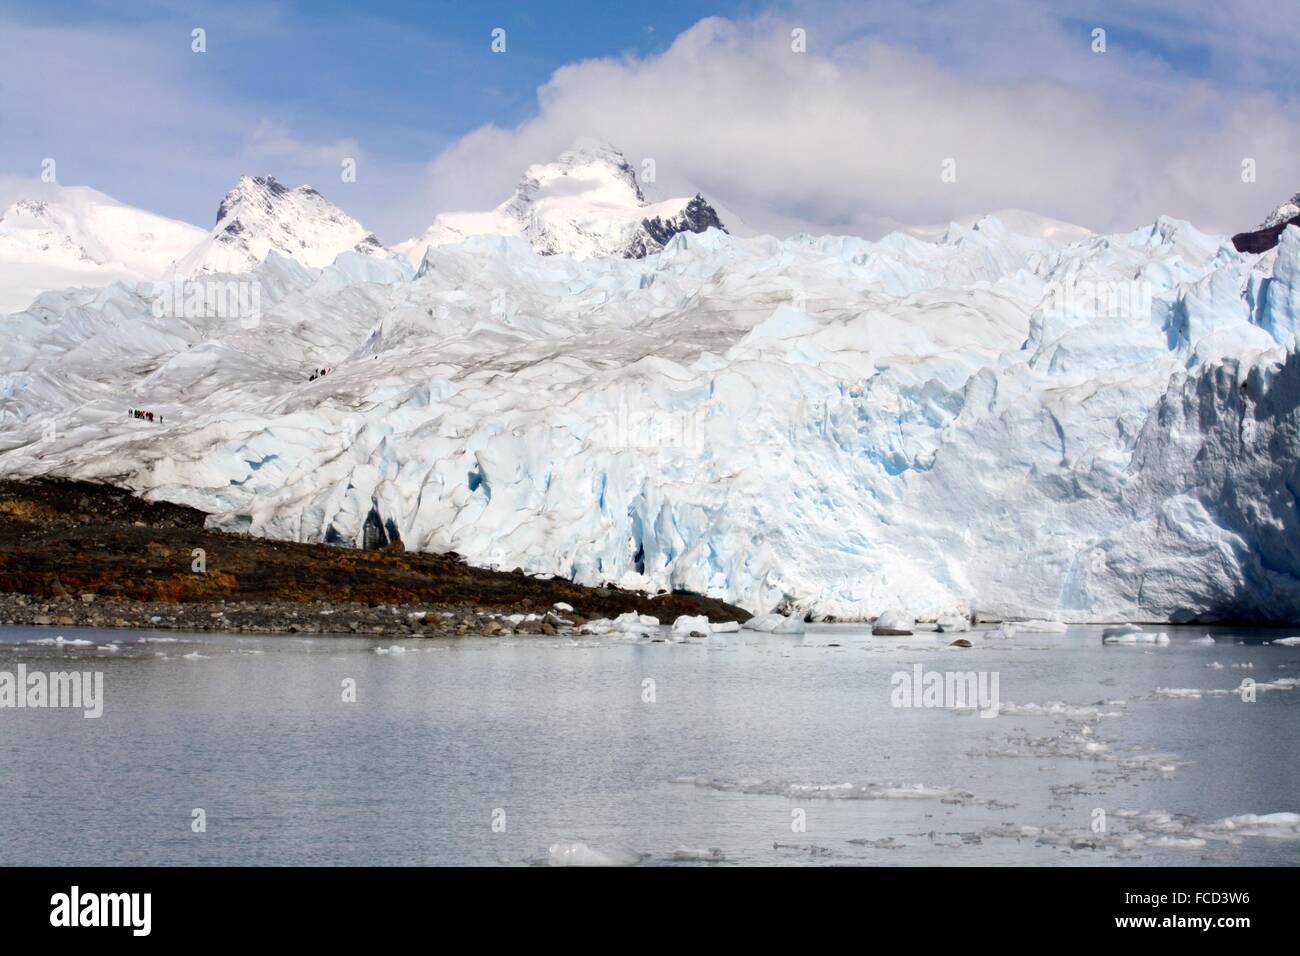 Remote Tourists In An Extreme Route On Glacial Mountains Stock Photo